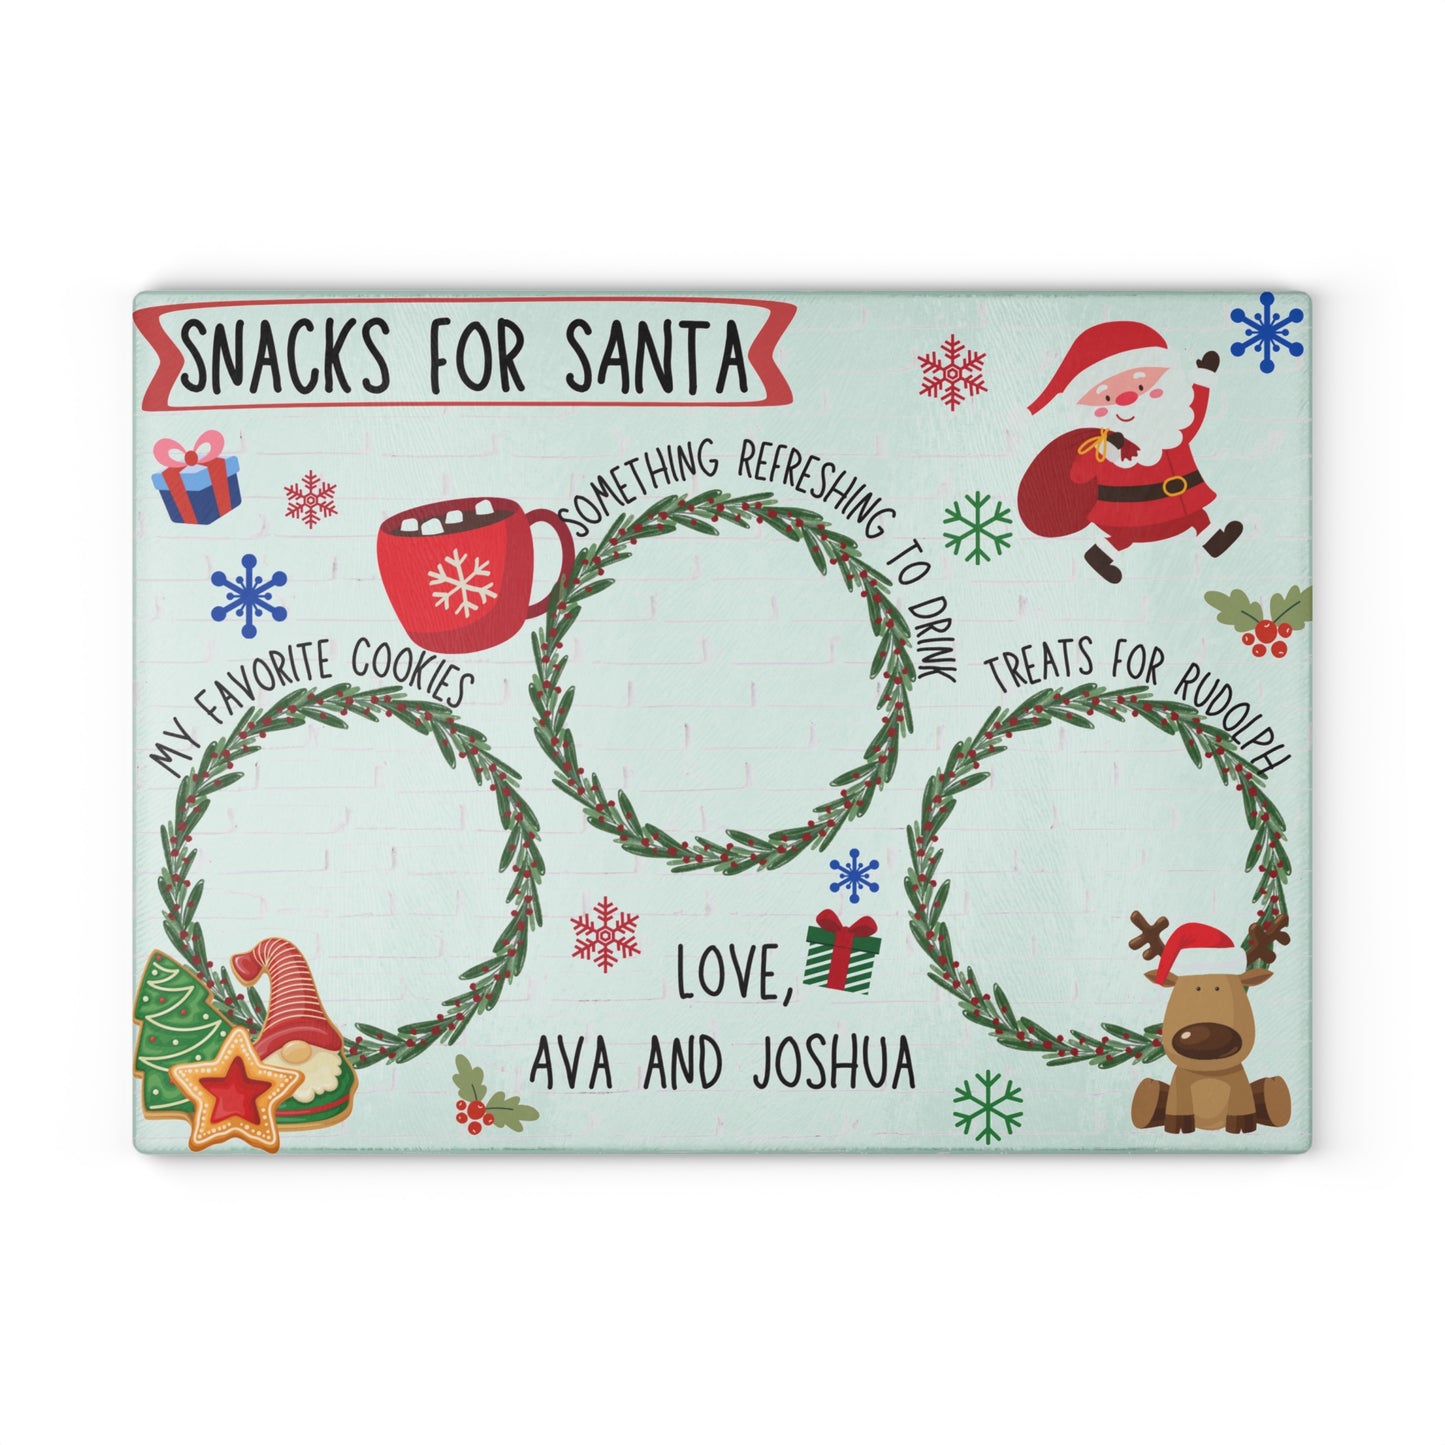 Snack for Santa Glass Cookie and Treat Board for Kids Gift Ideas for Christmas Santa Snack Tray